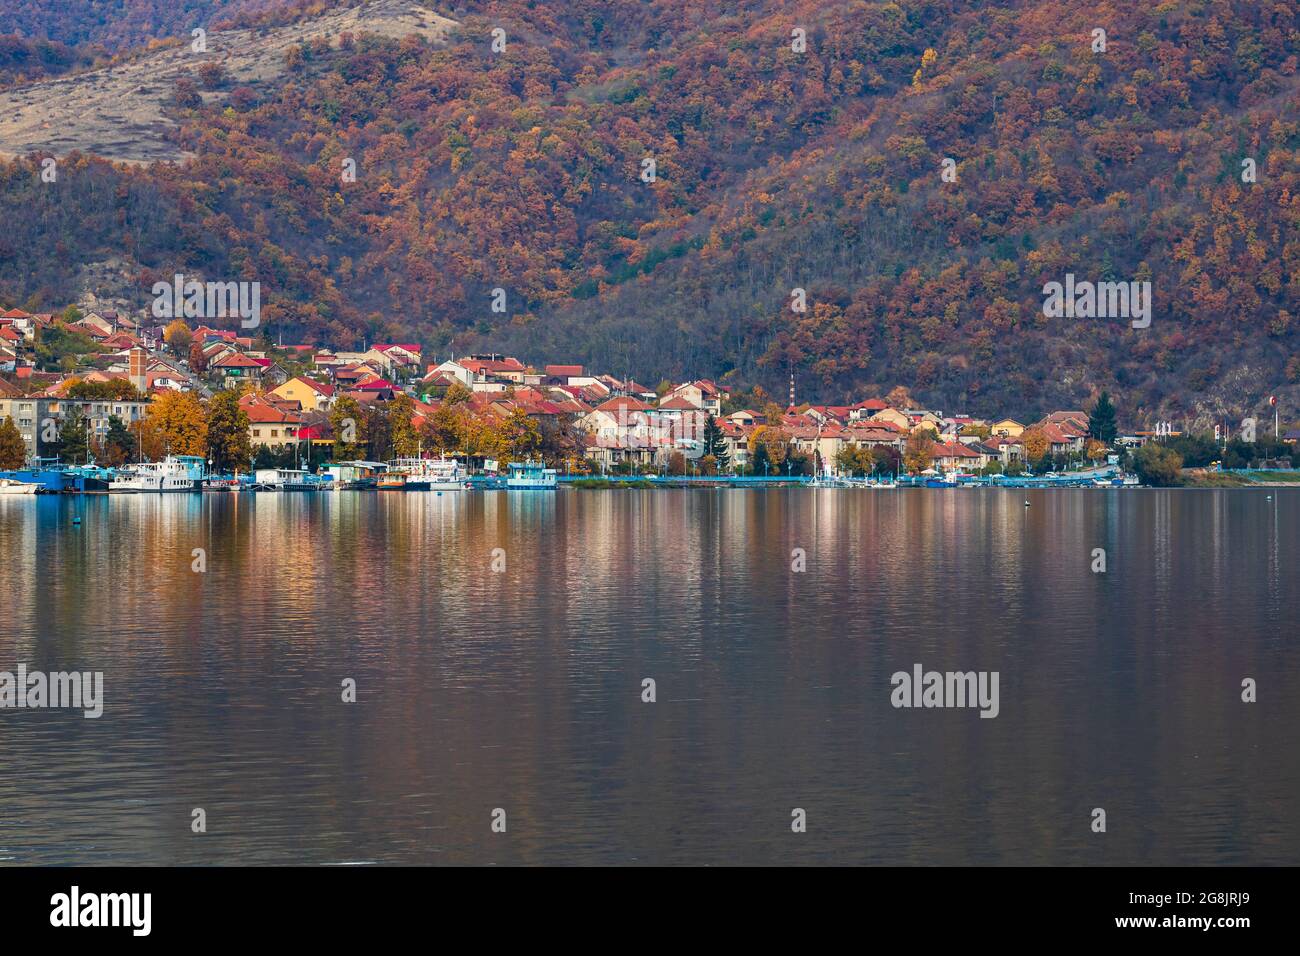 View of Danube river and Orsova city vegetation and buildings in Orsova, Romania Stock Photo